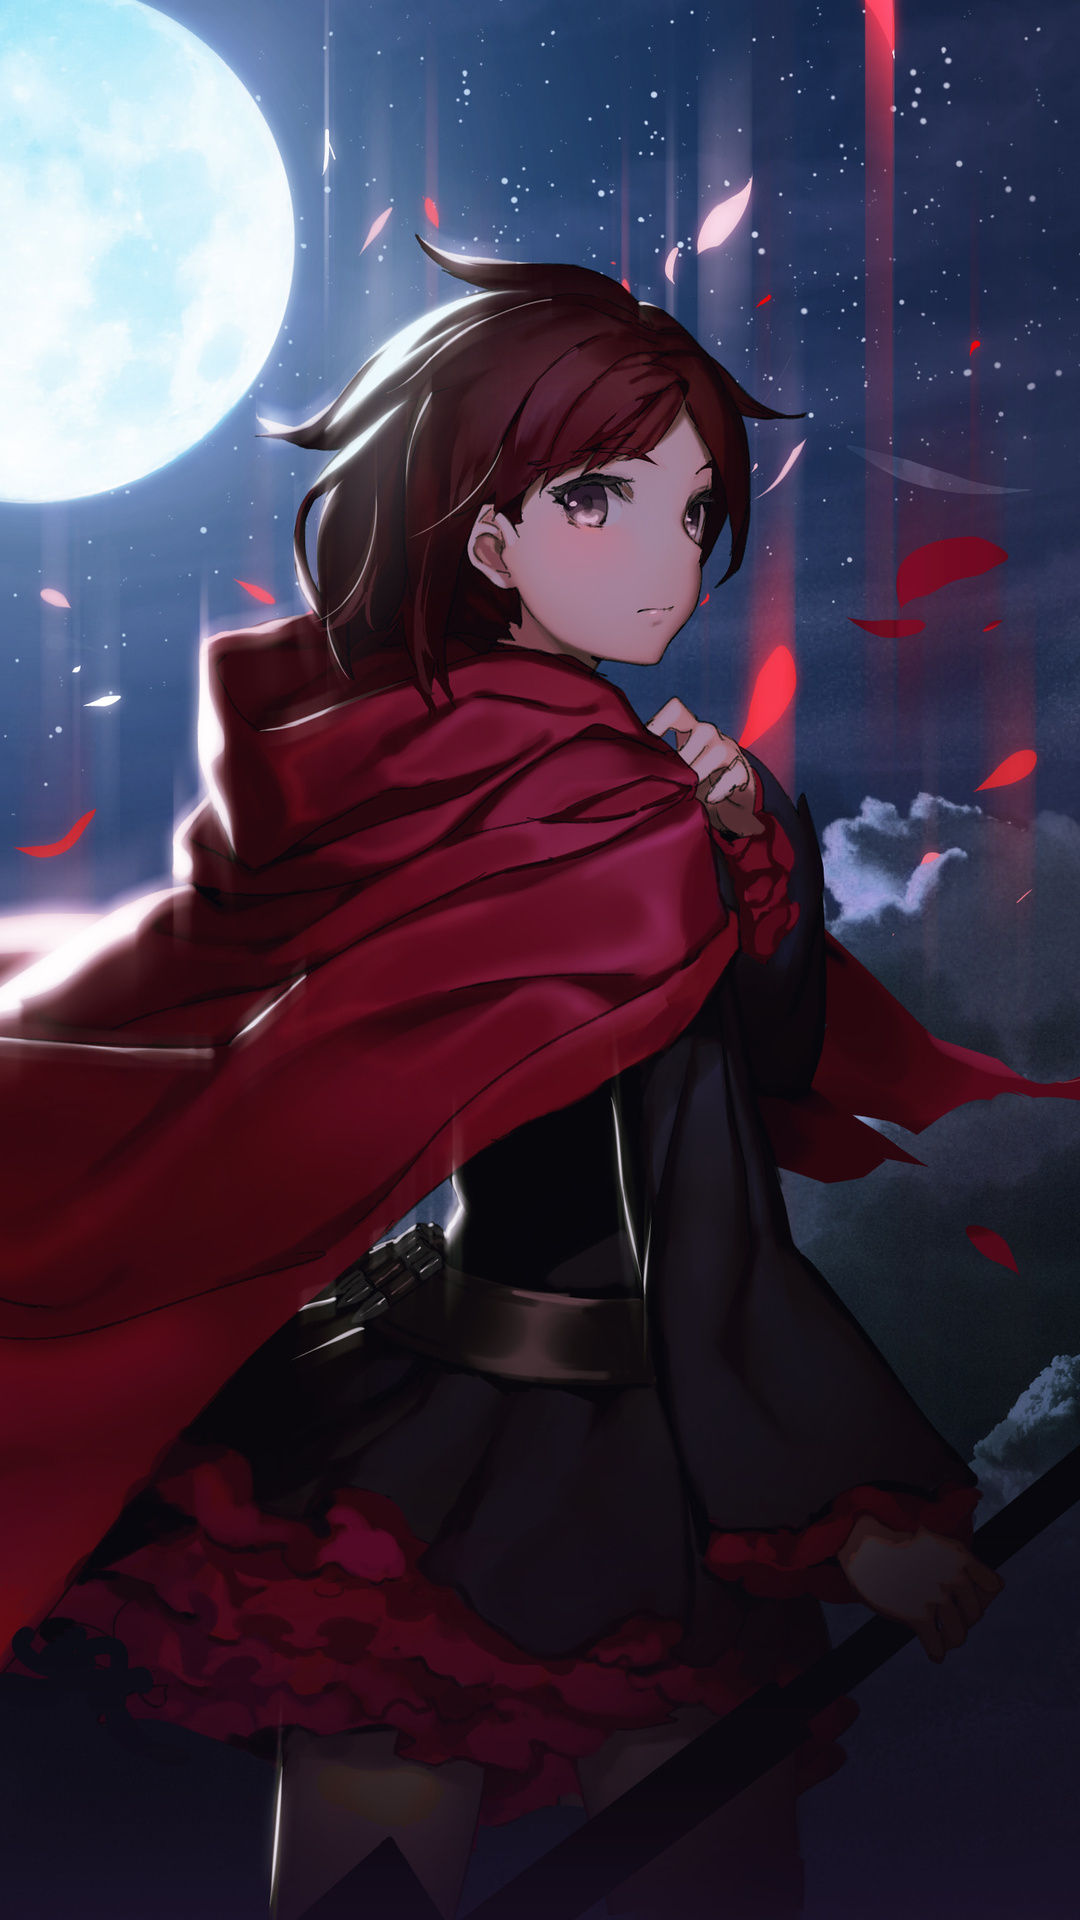 1080x1920 Ruby Rose Rwby 4k Iphone 7,6s,6 Plus, Pixel xl ,One Plus 3,3t,5 HD 4k Wallpapers, Images, Backgrounds, Photos and Pictures